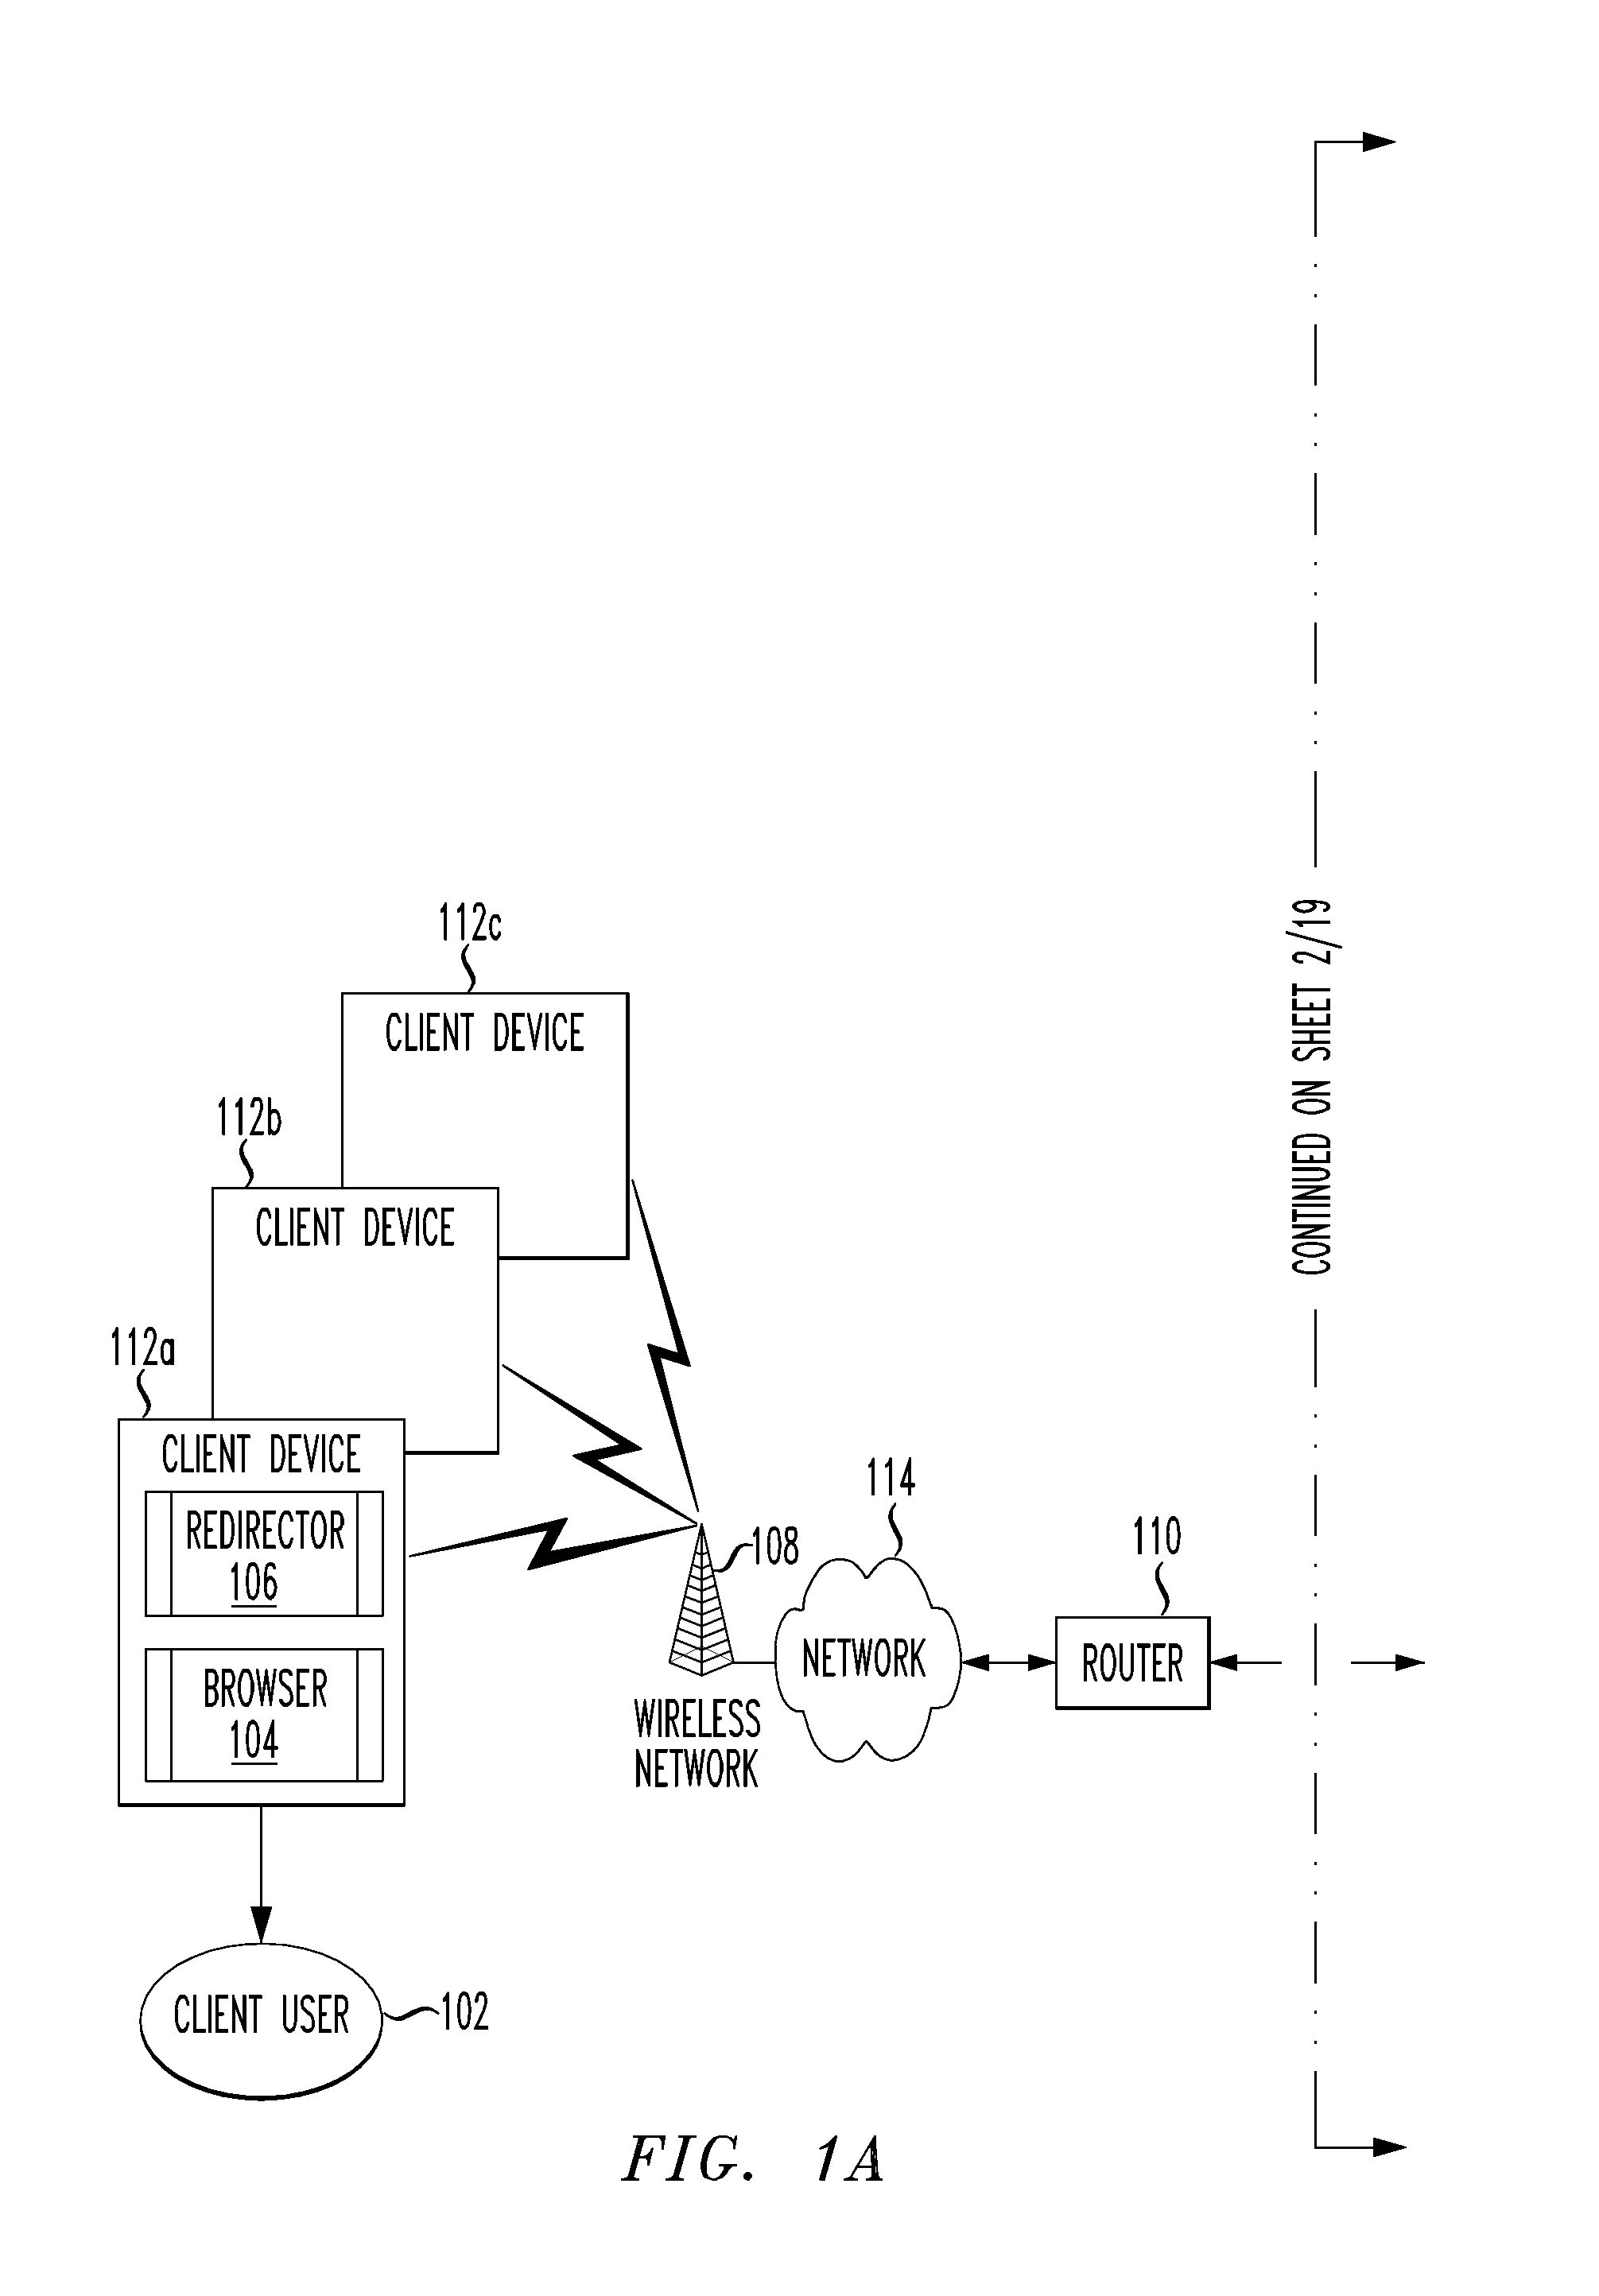 System and method for developing applications in wireless and wireline environments